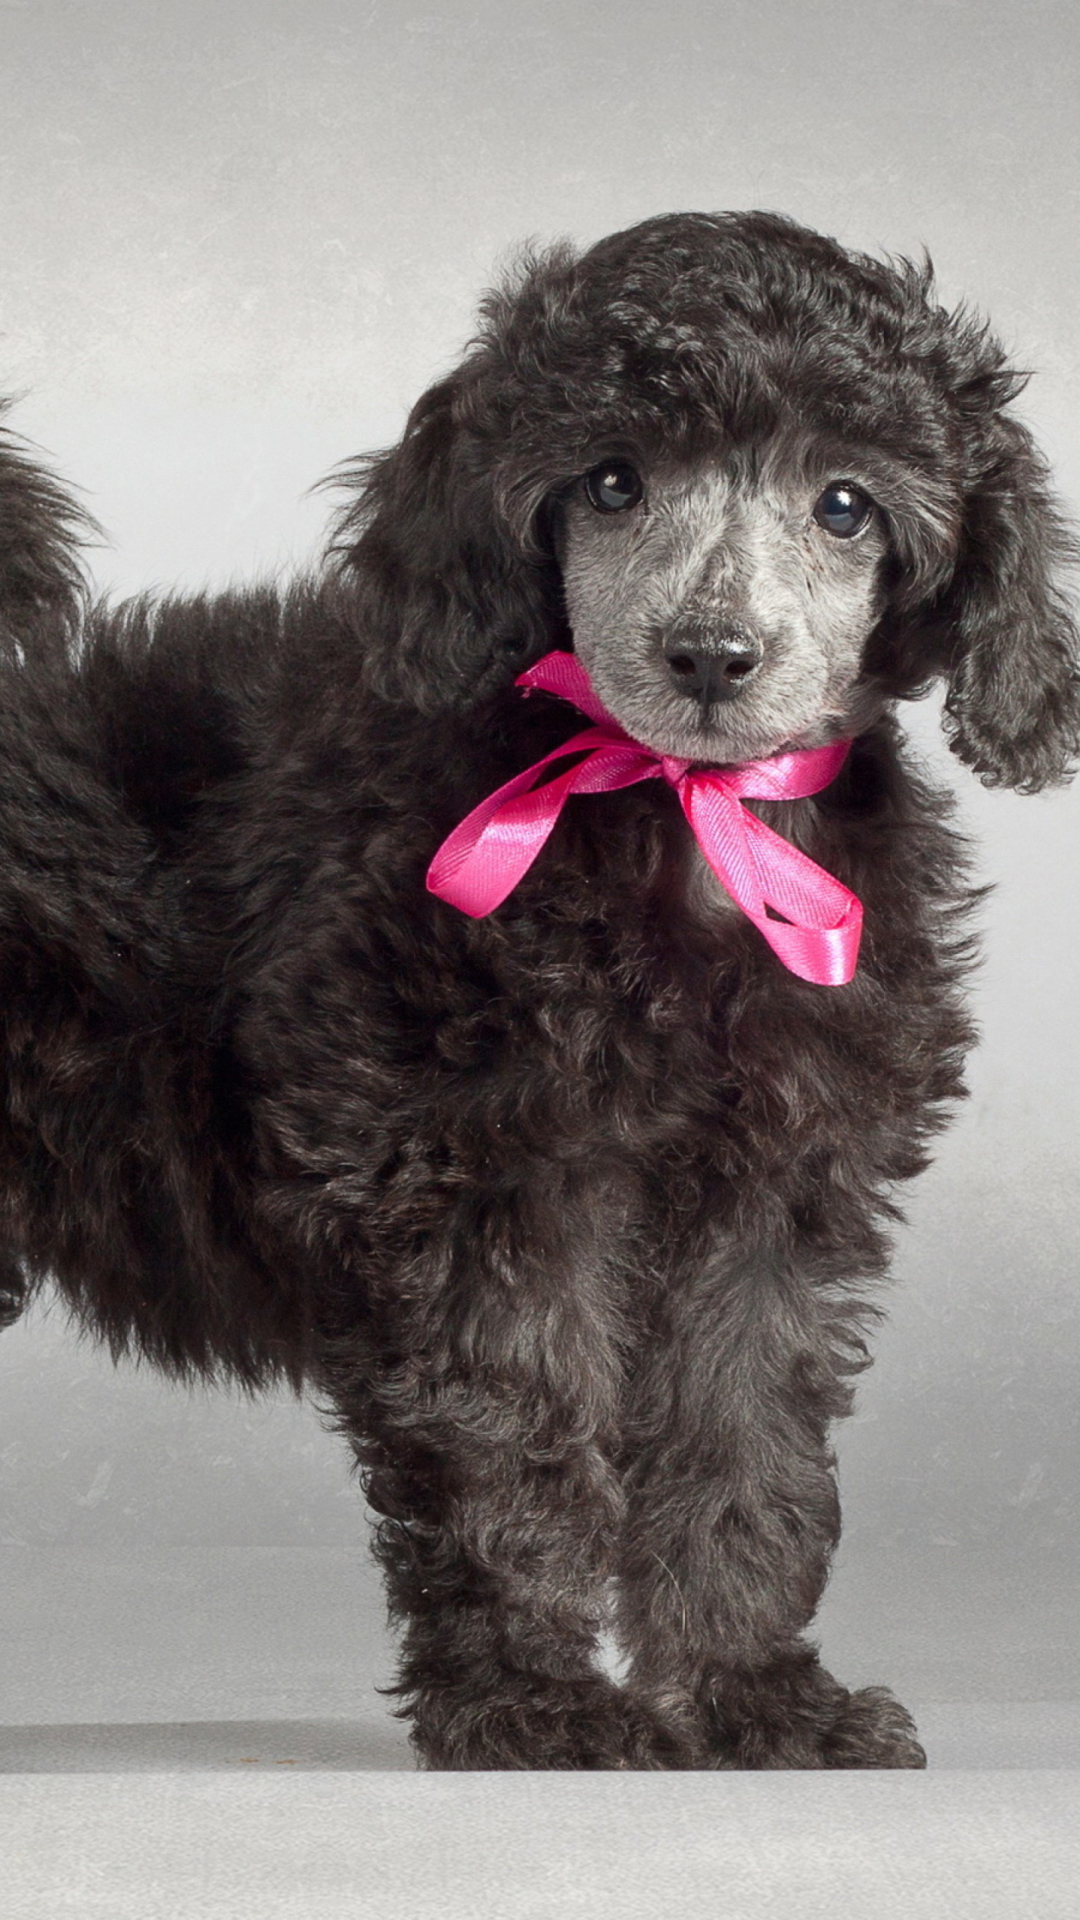 Funny Puppy With Pink Bow screenshot #1 1080x1920